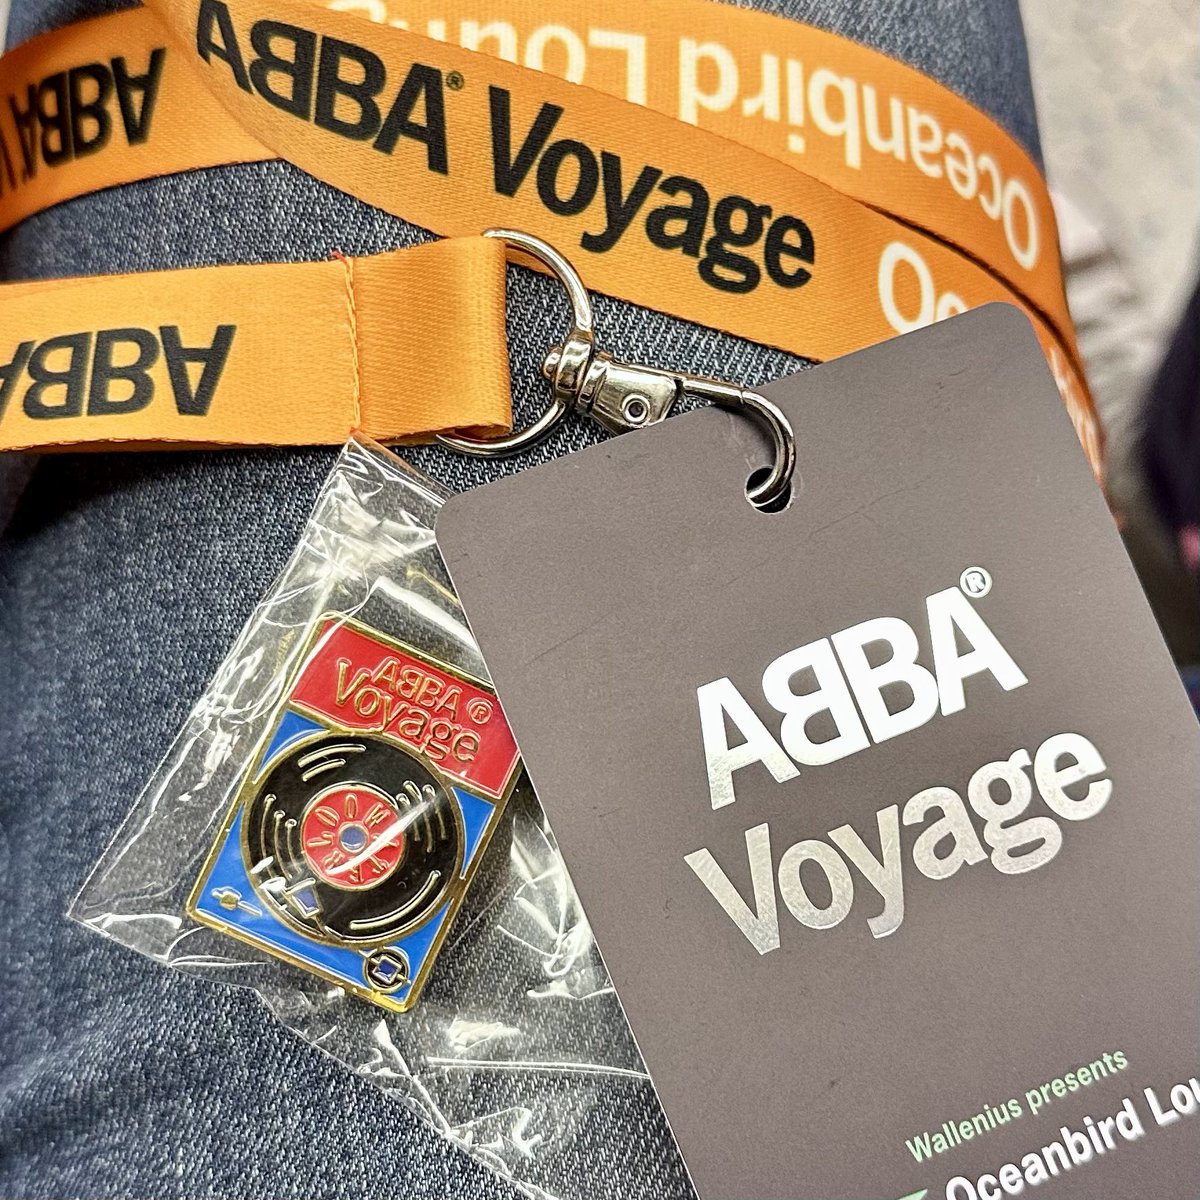 Gonna treasure my #ABBA50th souvenirs from @abbavoyage today! What is your most treasured item of #memorabilia? I’ll be with you from 7-10pm @magicfm with your #SatEvening soundtrack magic.co.uk #Waterloo50